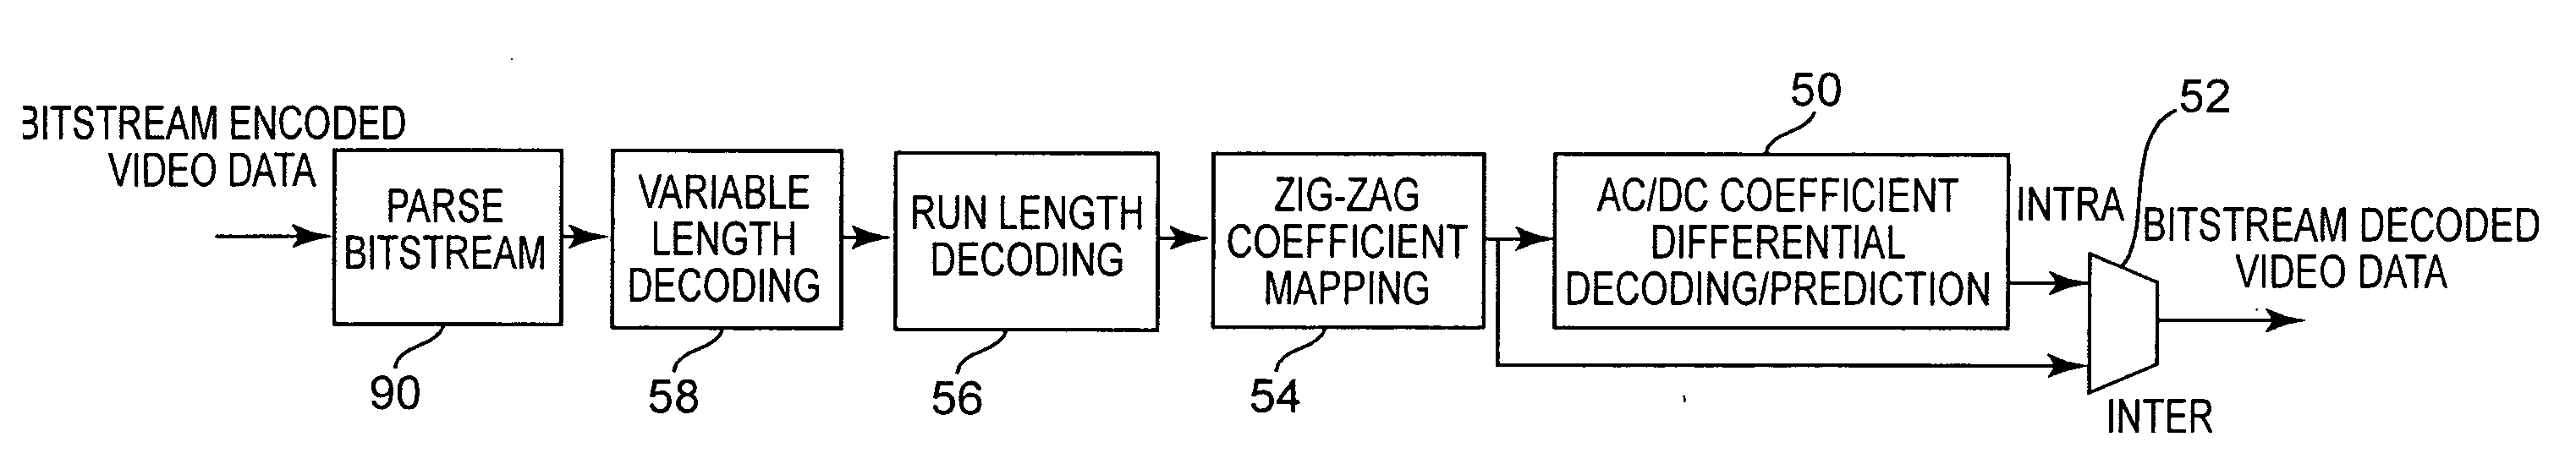 Encoding, decoding and transcoding of audio/video signals using combined parallel and serial processing techniques